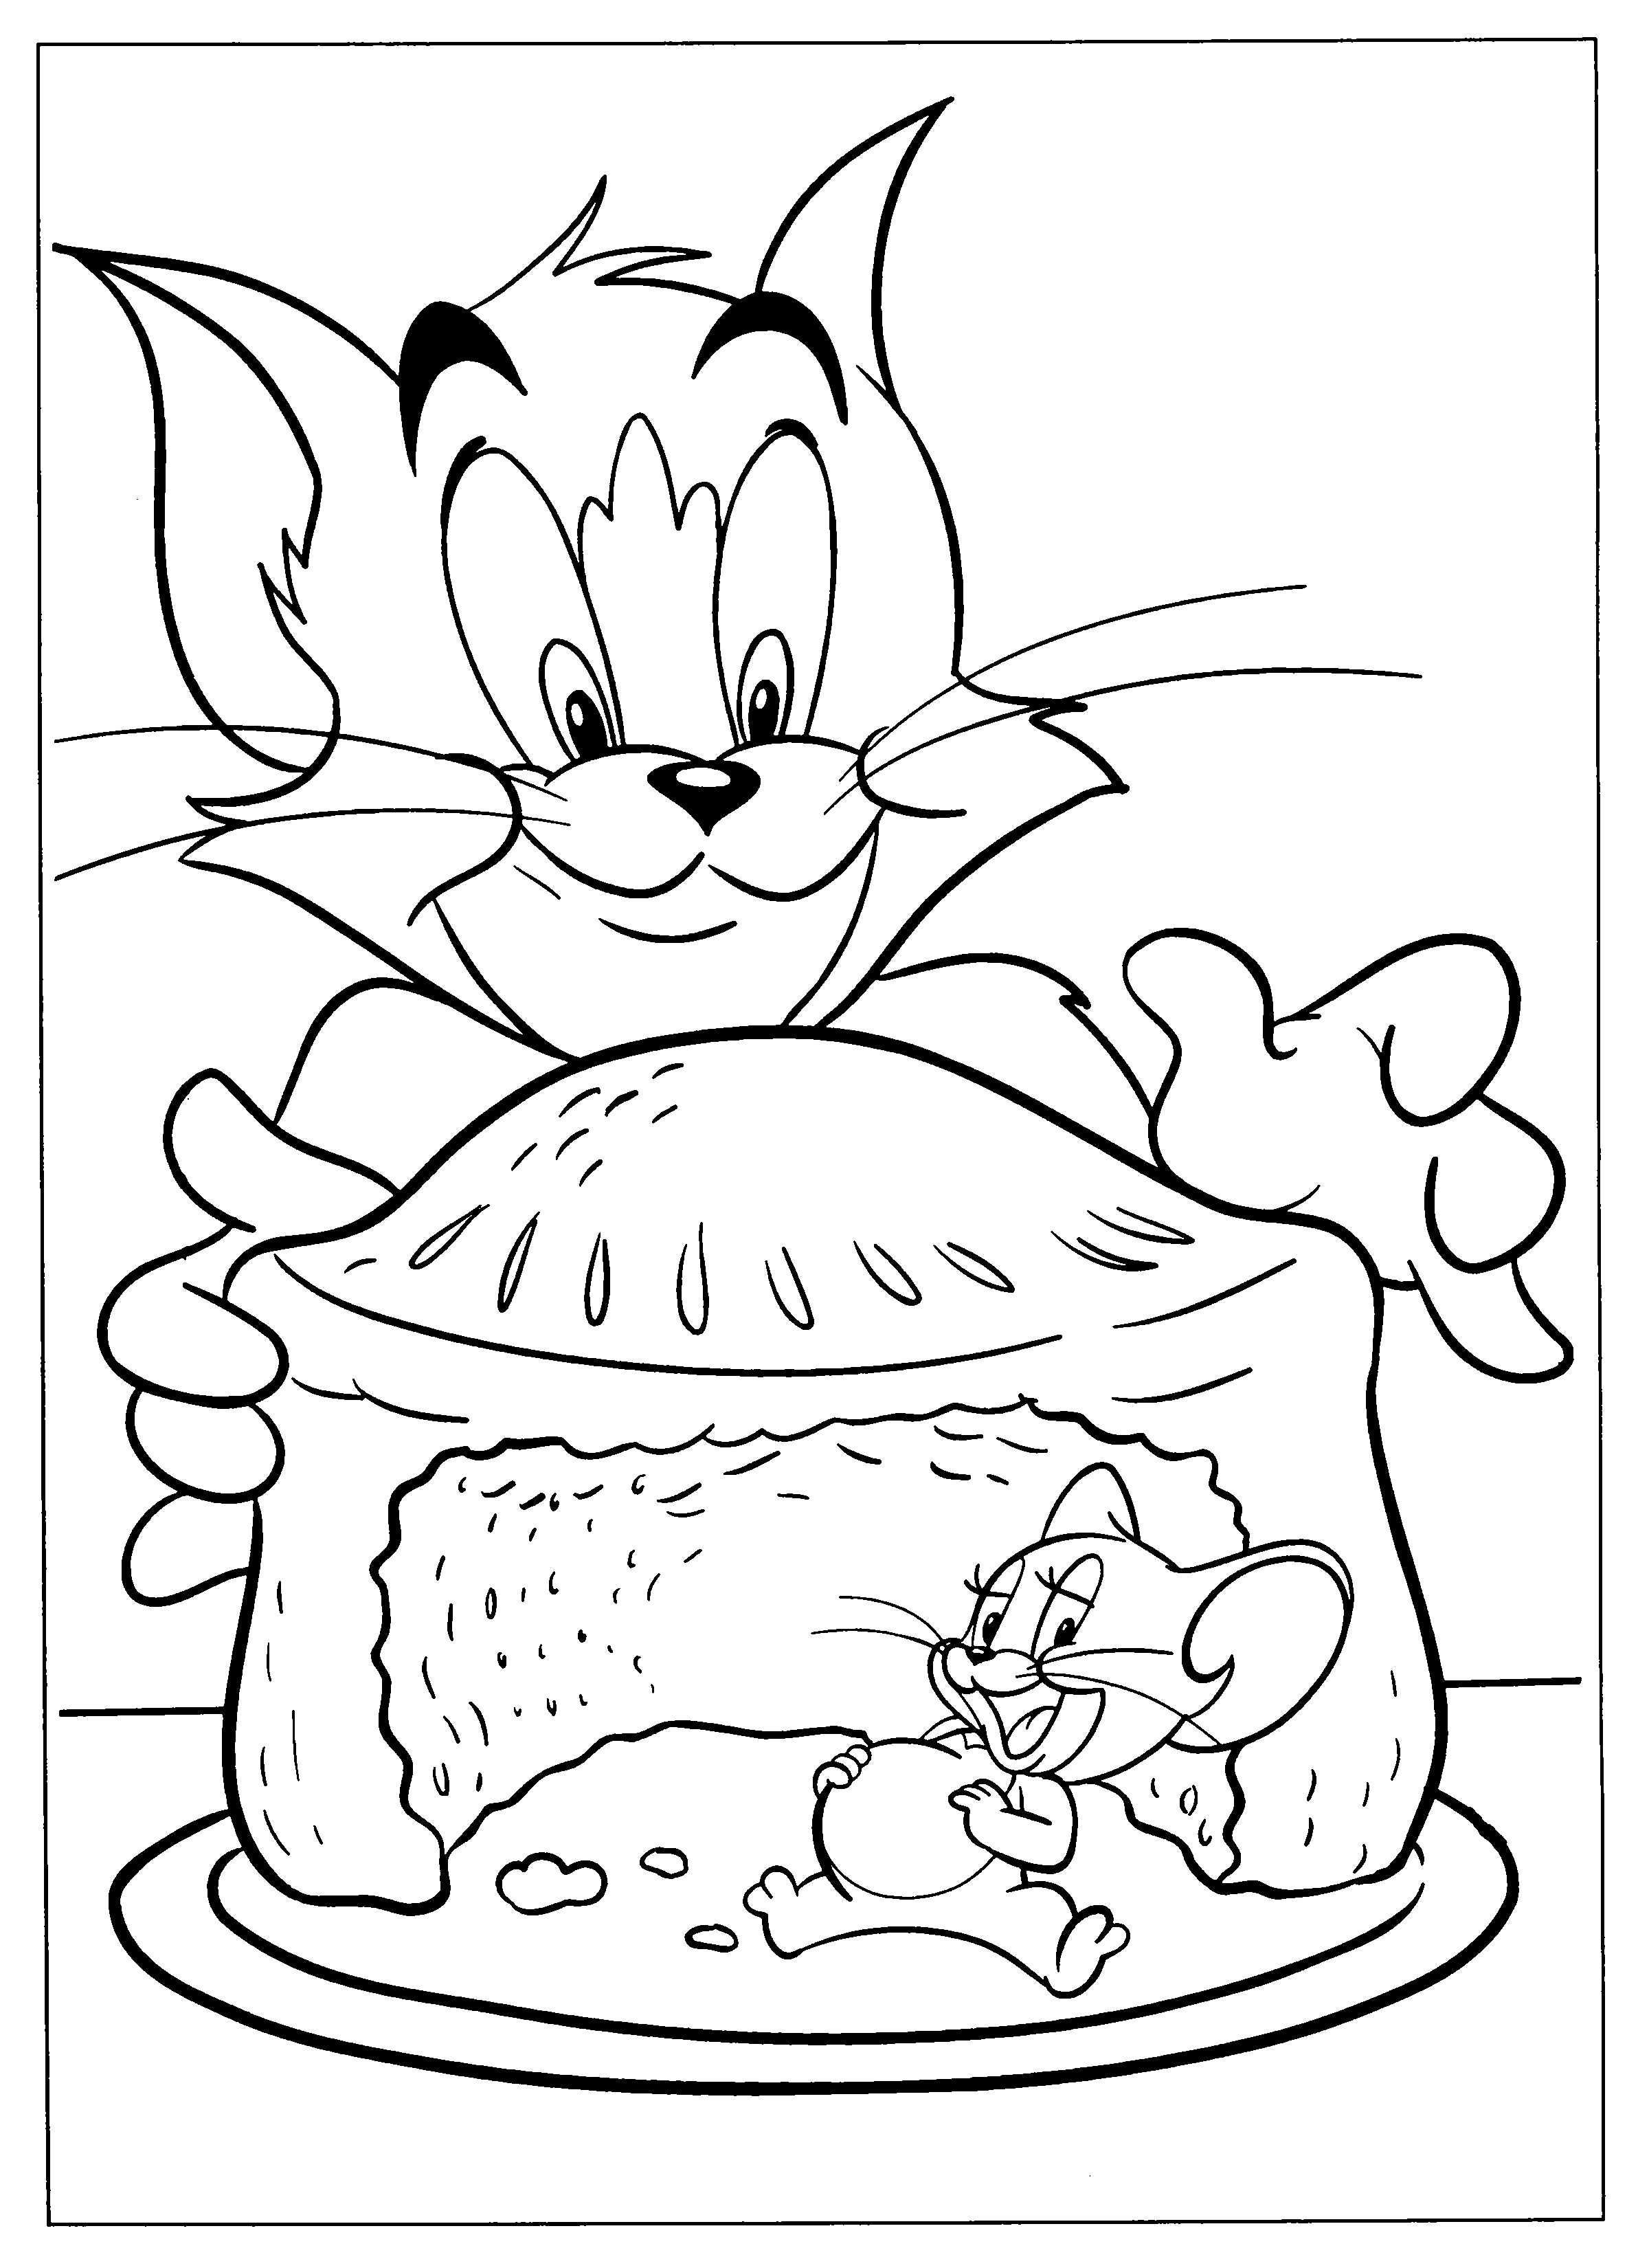 Tom And Jerry Coloring Pictures To Print